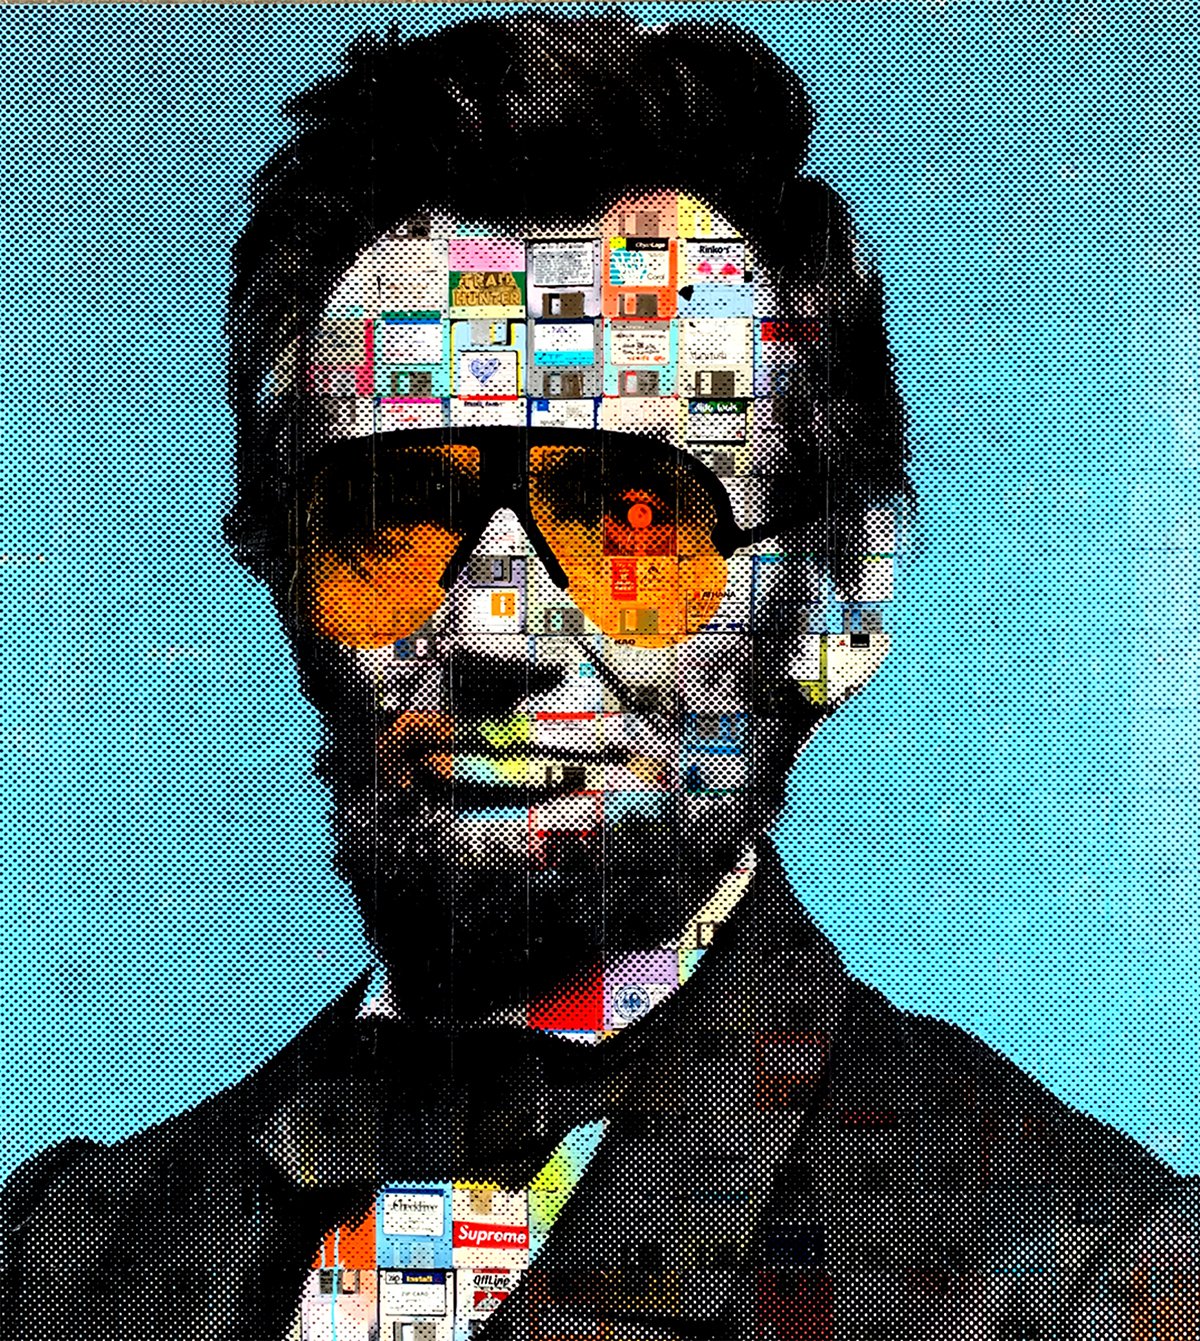 "Abraham Lincoln v2.0" (blue) painting on recycled computer floppy disks